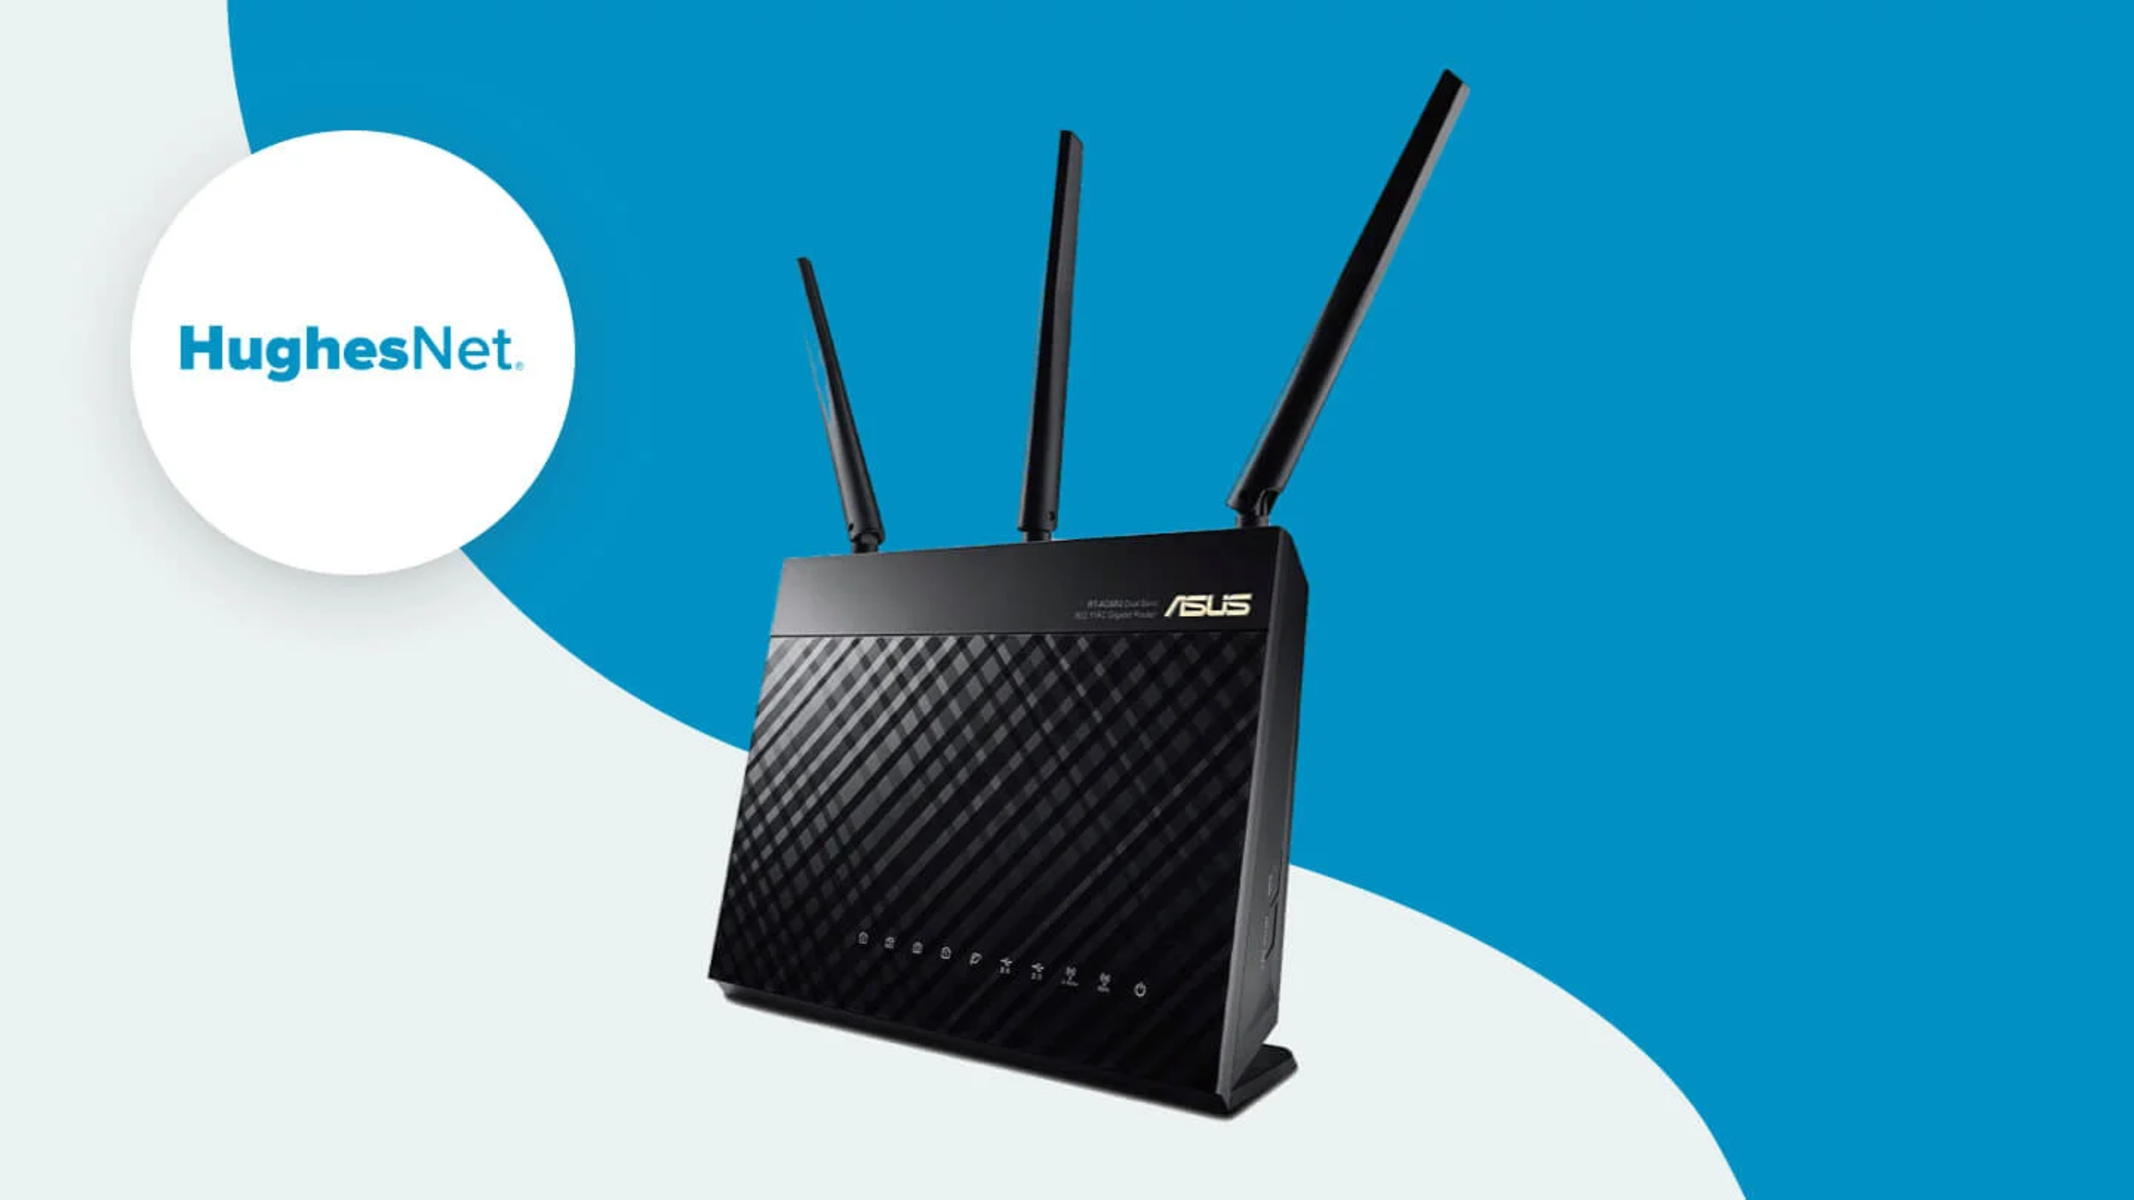 What Kind Of Wireless Router Do I Need For Hughesnet